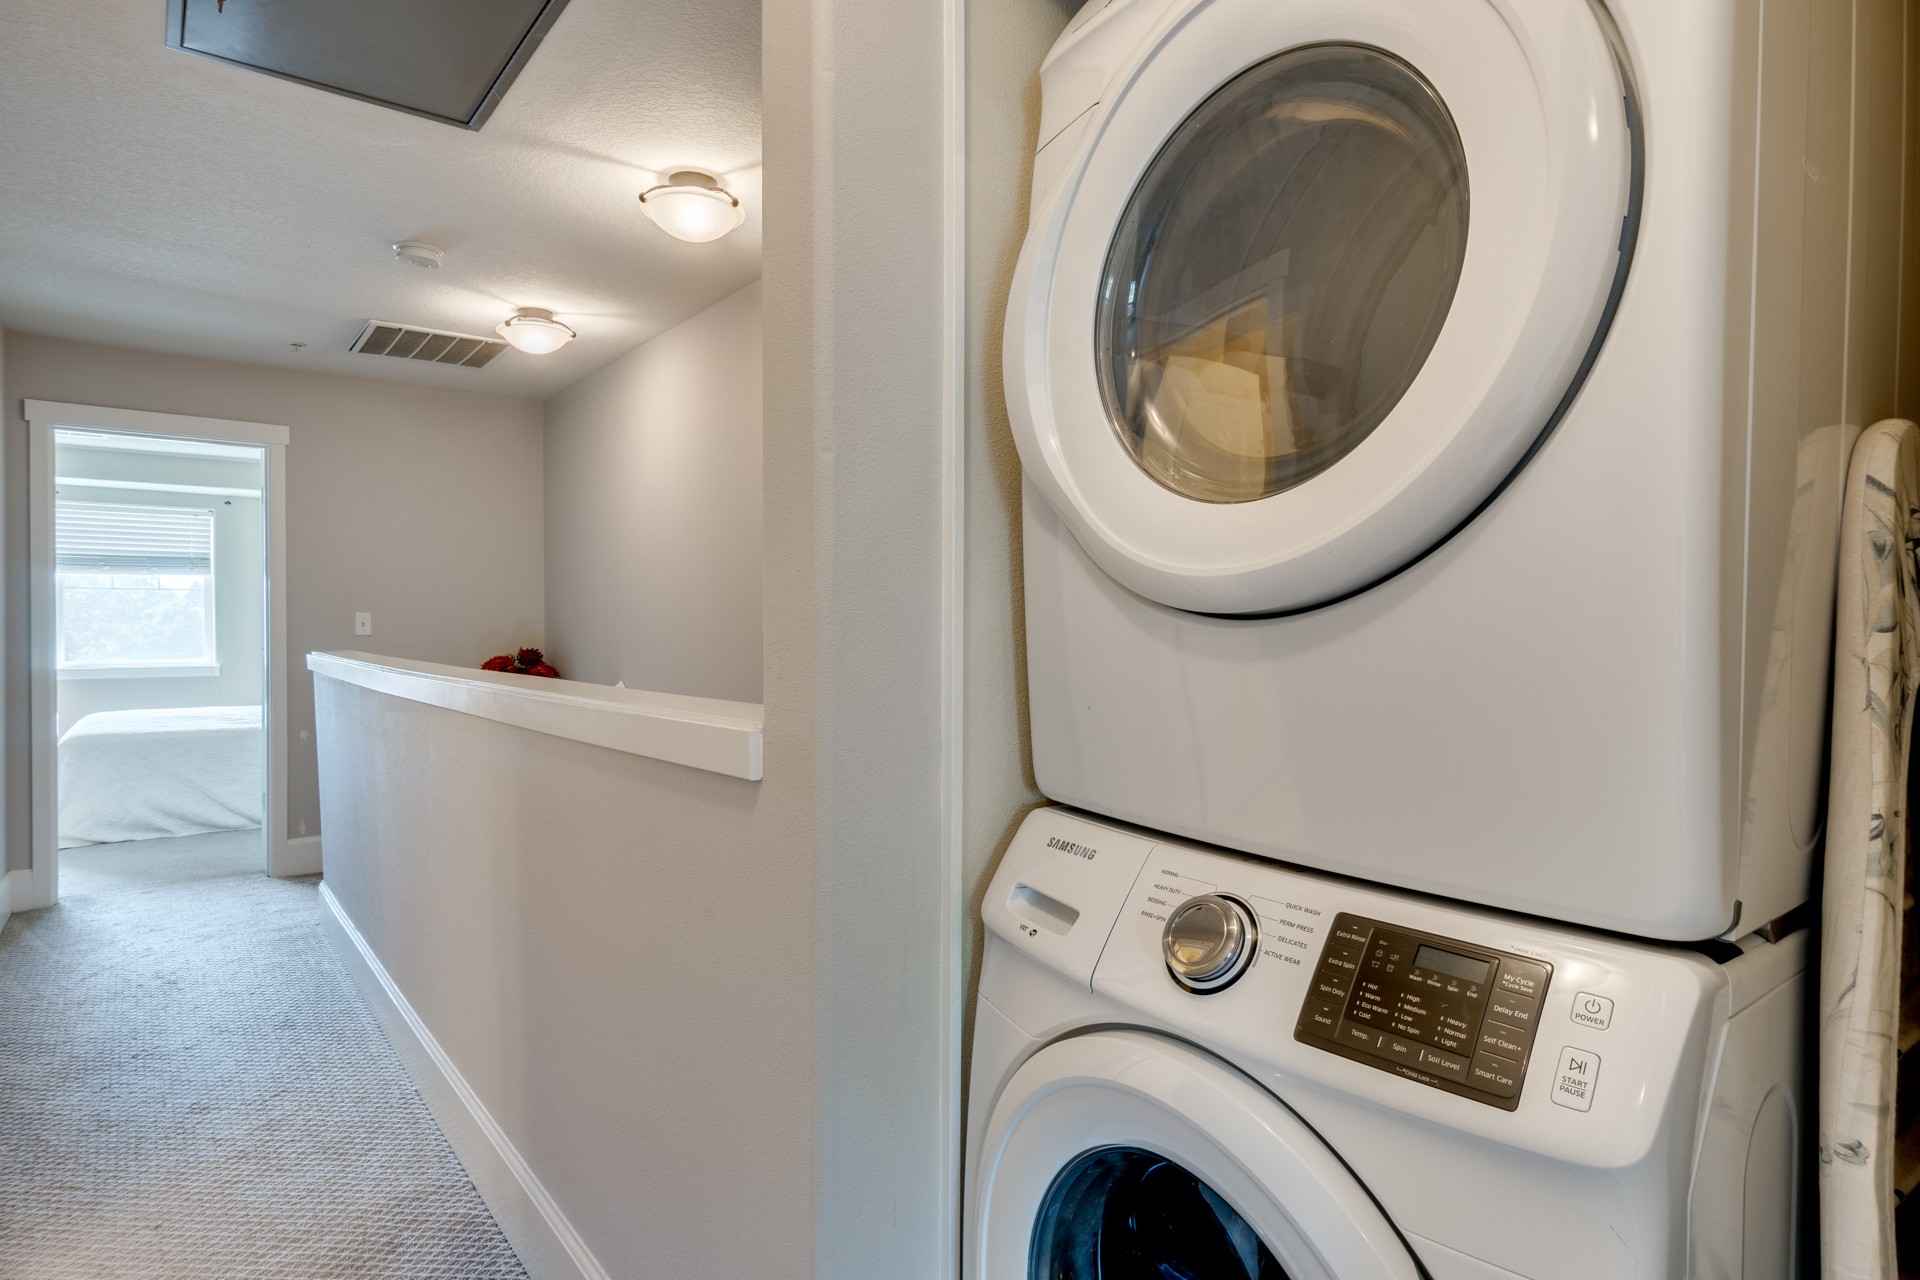 Laundry area - washer and dryer are included 